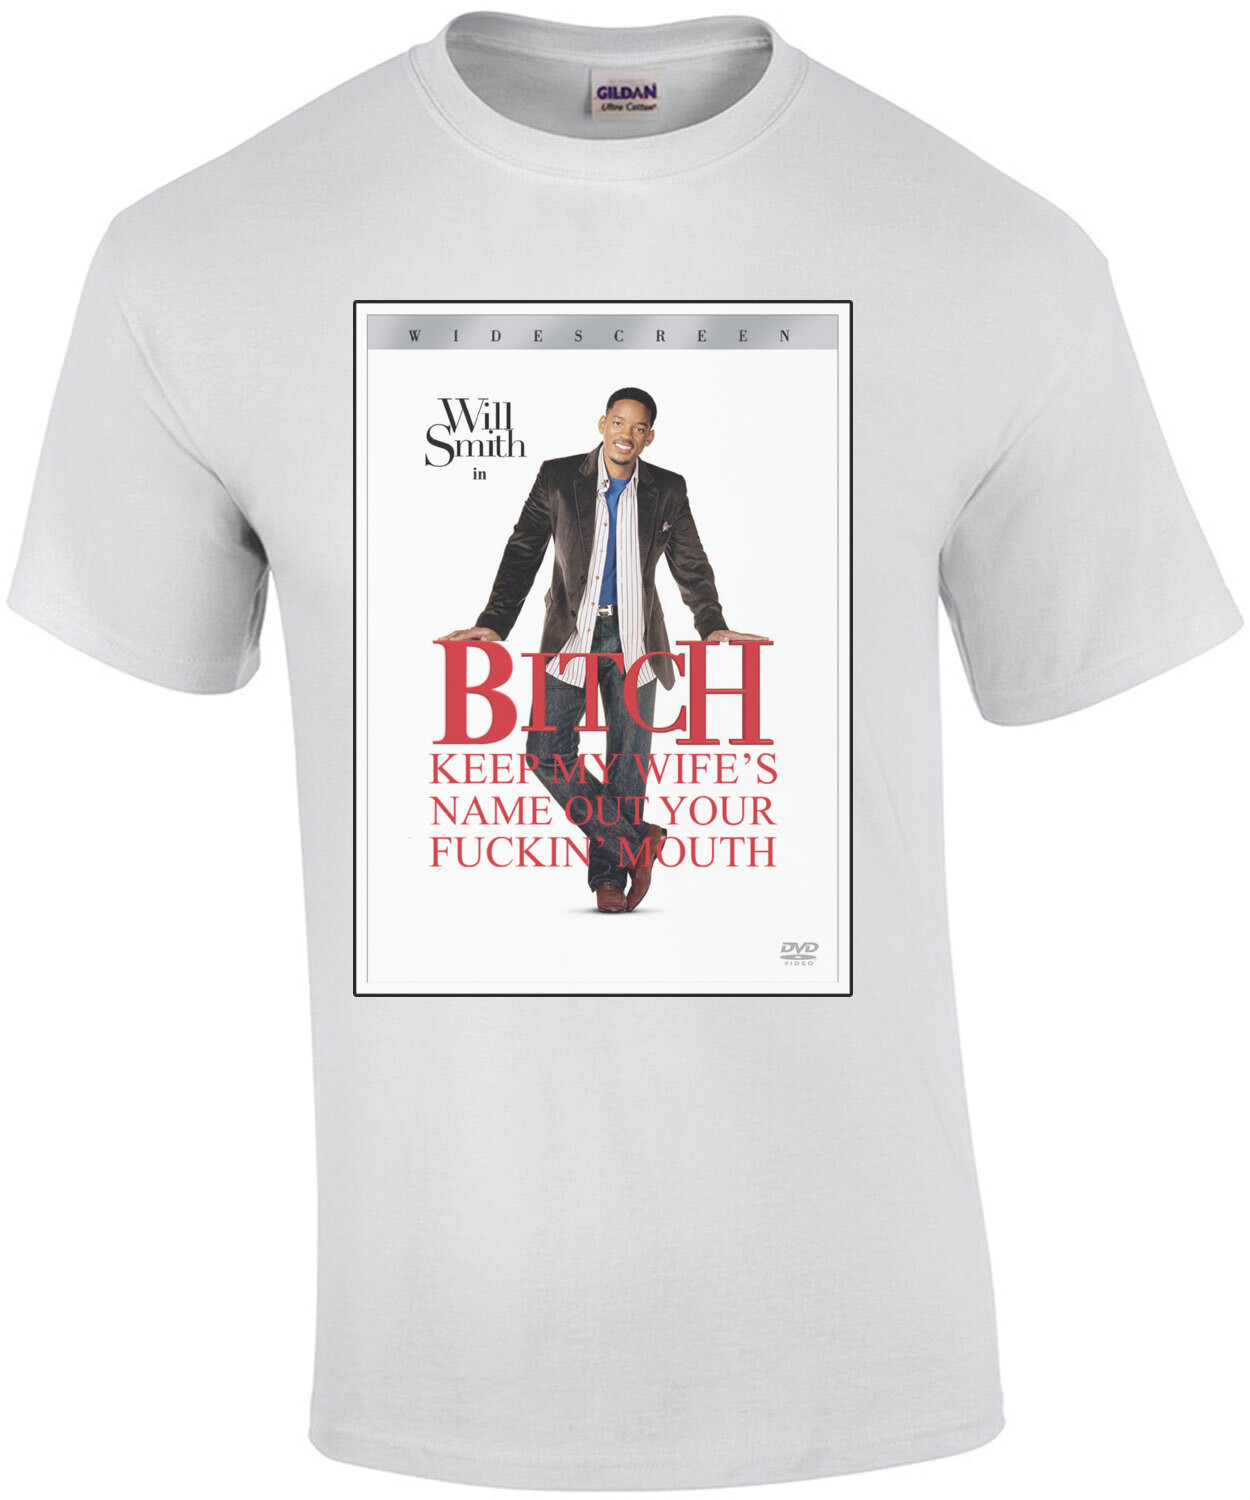 Keep My Wife's Name Out Your Mouth - Funny Will Smith Chris Rock Shirt